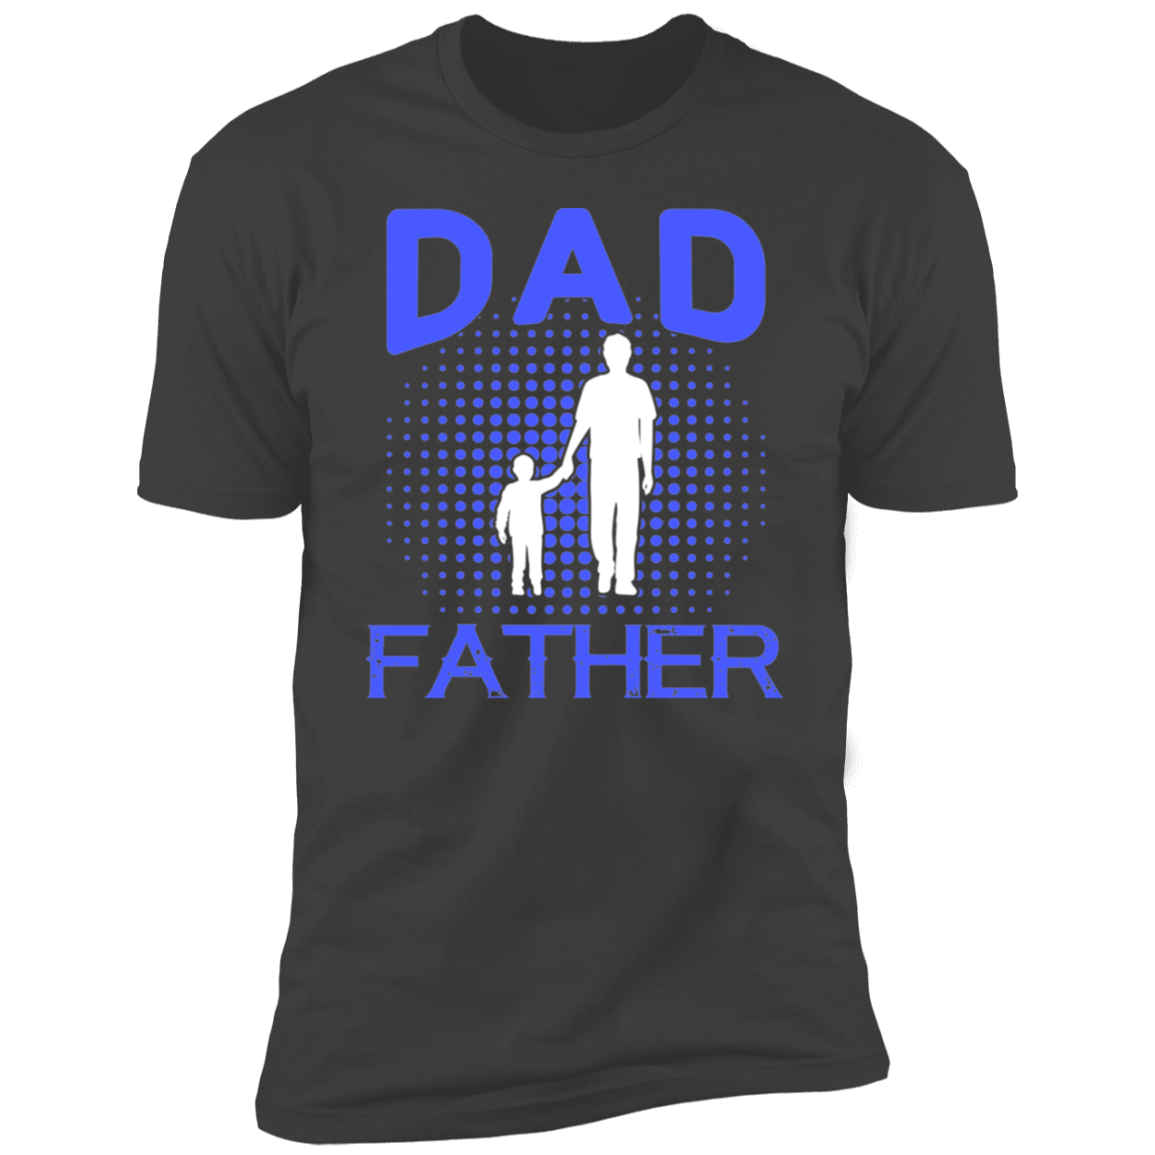 DAD FATHER Short Sleeve T-Shirt